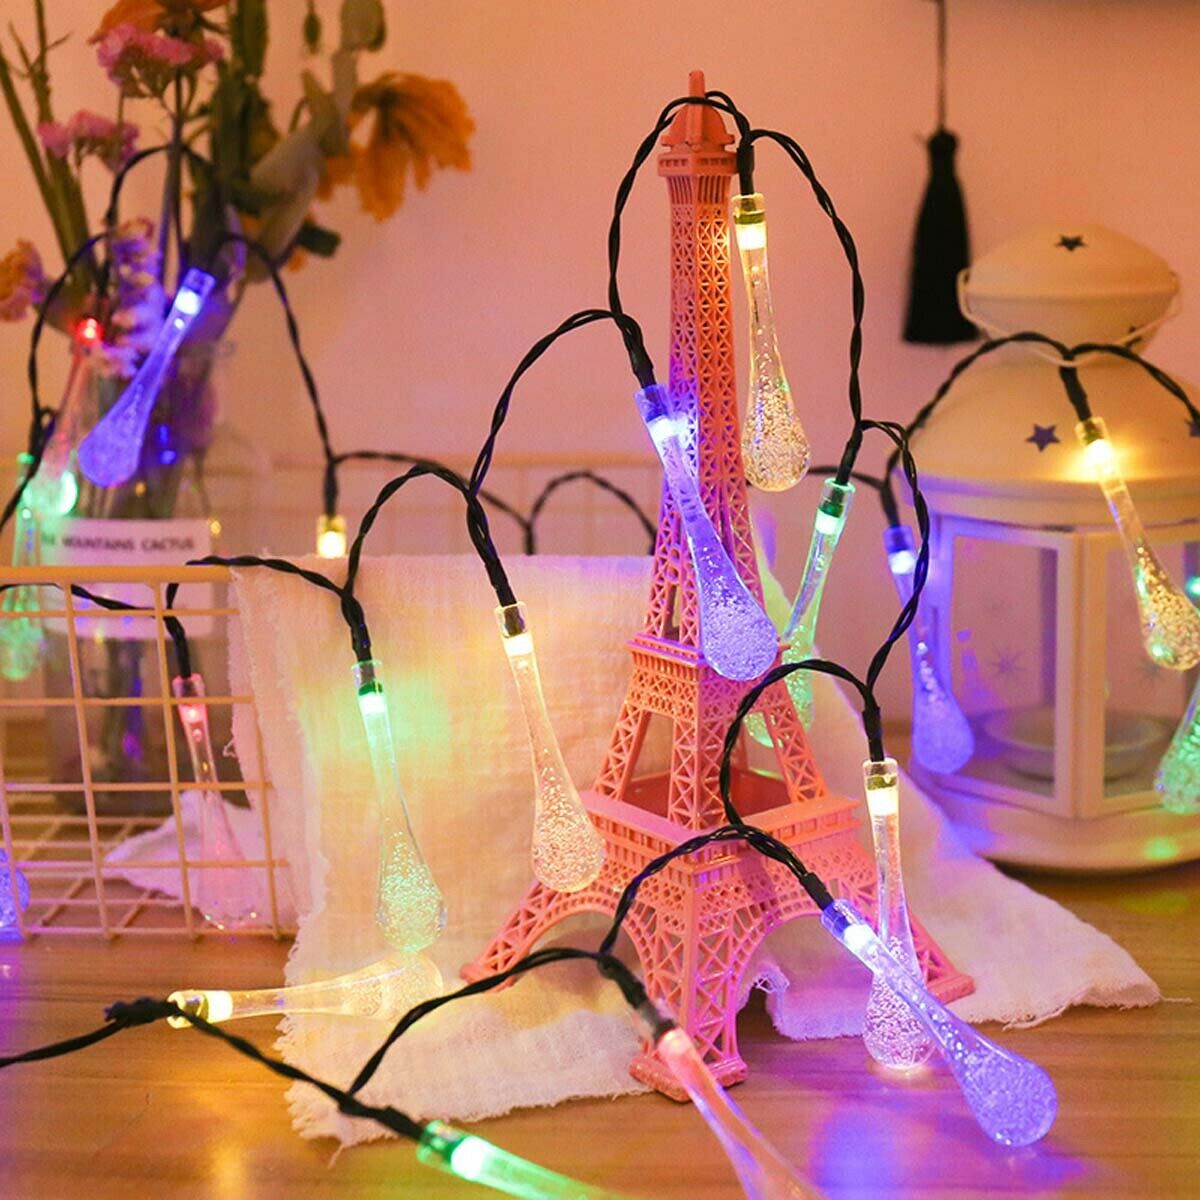 Find 6 5M 30LED Solar Water Drop String Lights Wide Angle LED Raindrop Teardrop Outdoor Fairy String Lights for Christmas Tree Garden Home Wedding Party Patio Holiday Decor Multicolor/Warm White/White for Sale on Gipsybee.com with cryptocurrencies